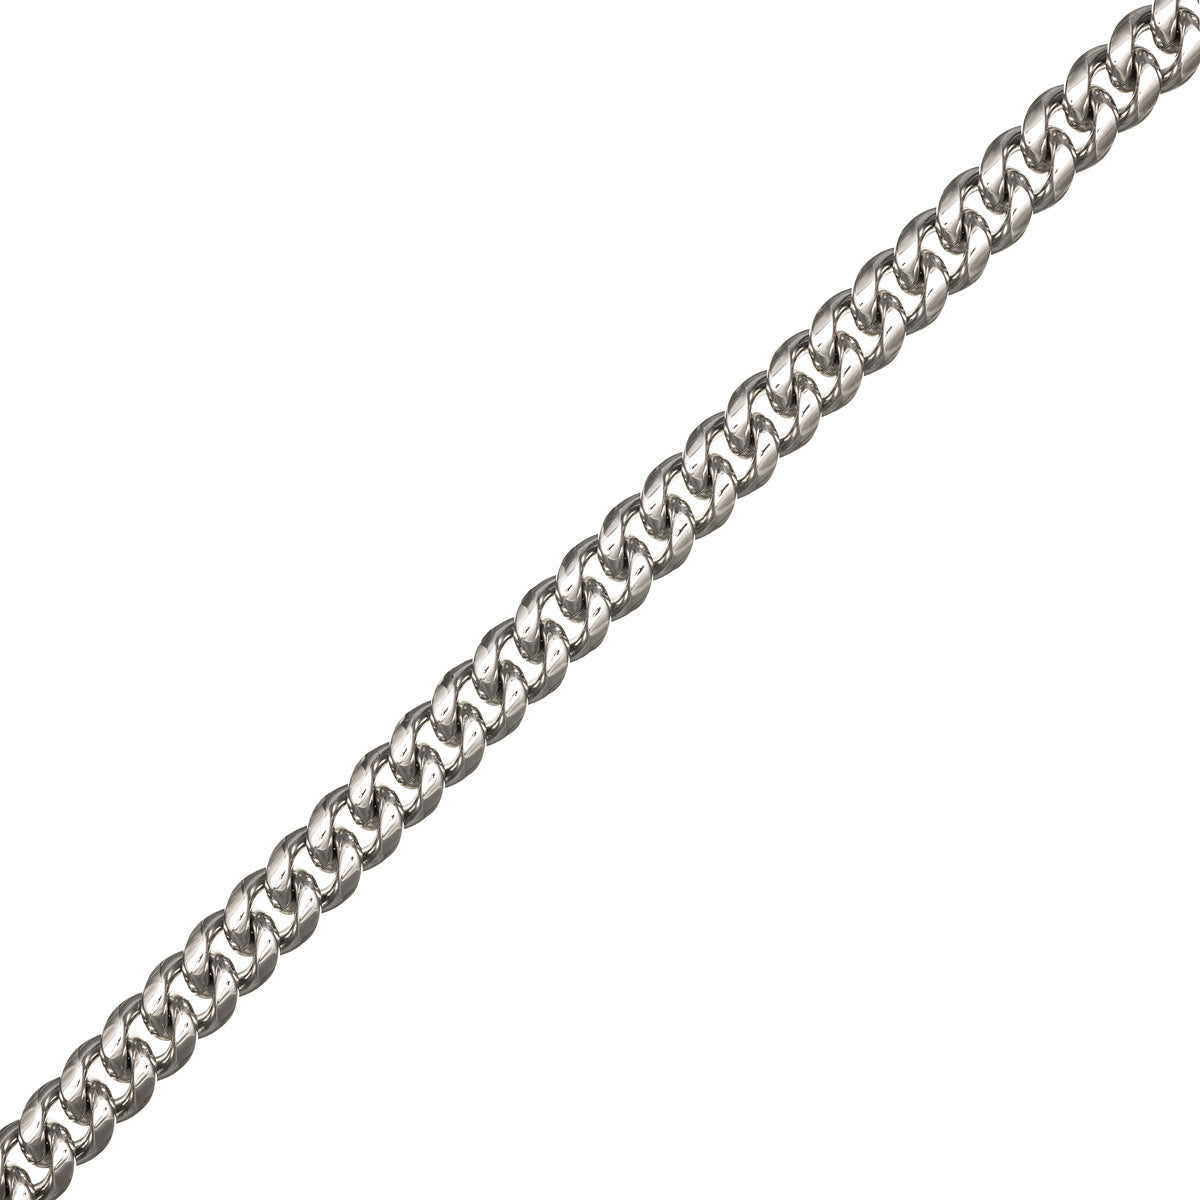 Thick armoured steel chain 60cm 1,2cm (Steel 316L)